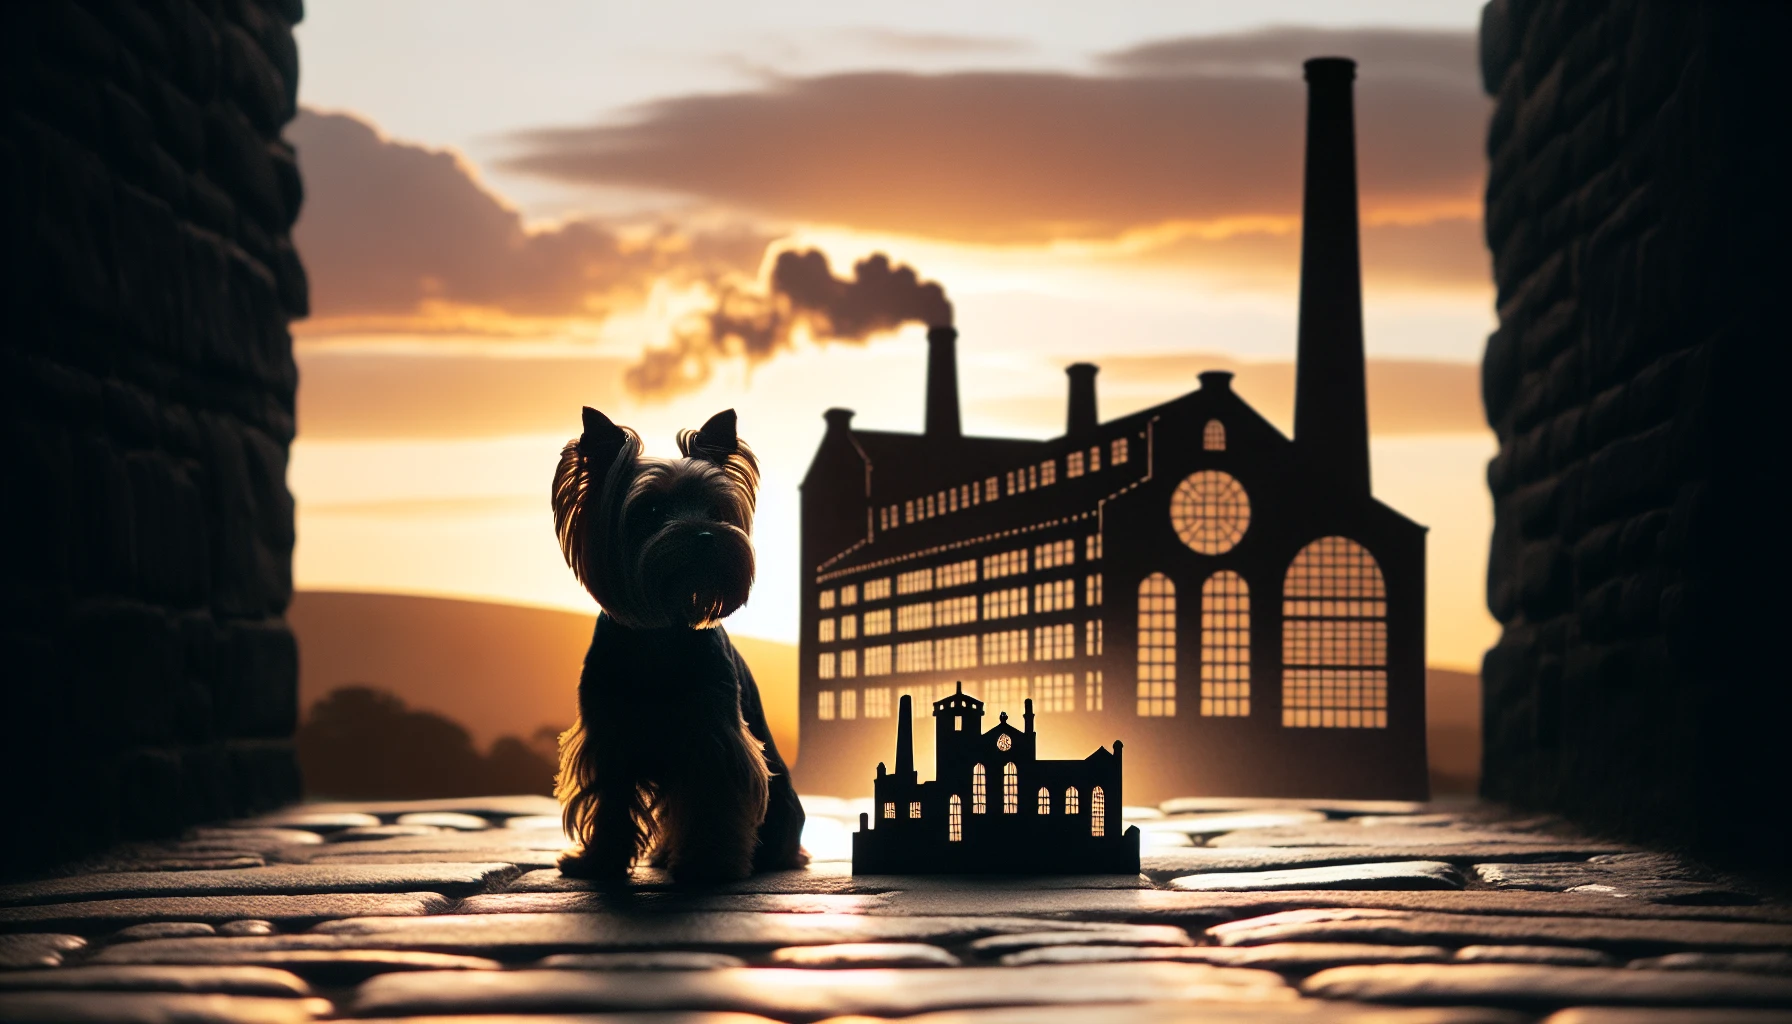 Silhouette of a Yorkshire Terrier against a historical backdrop